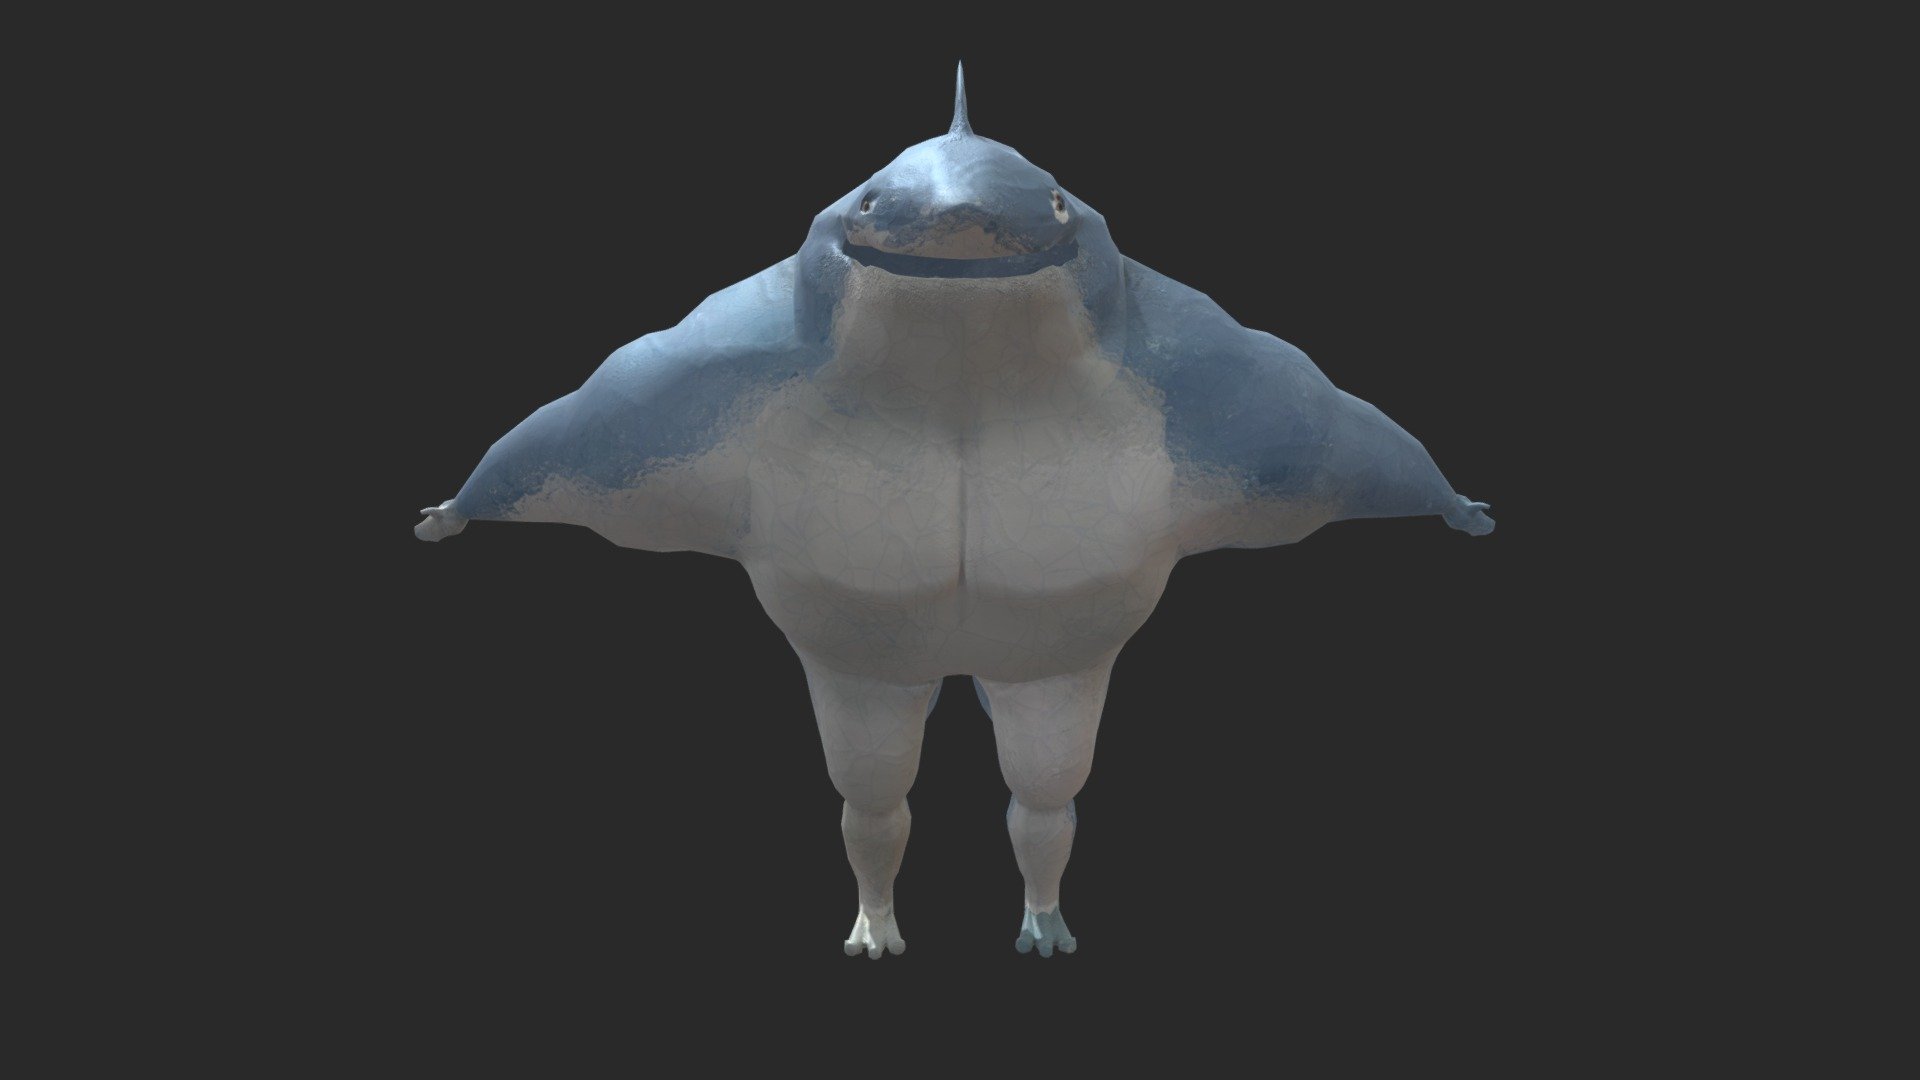 Here I've created a sharkman based on an assignment for 3D Modeling I at Wake Tech's Simulation and Game Development course track 3d model